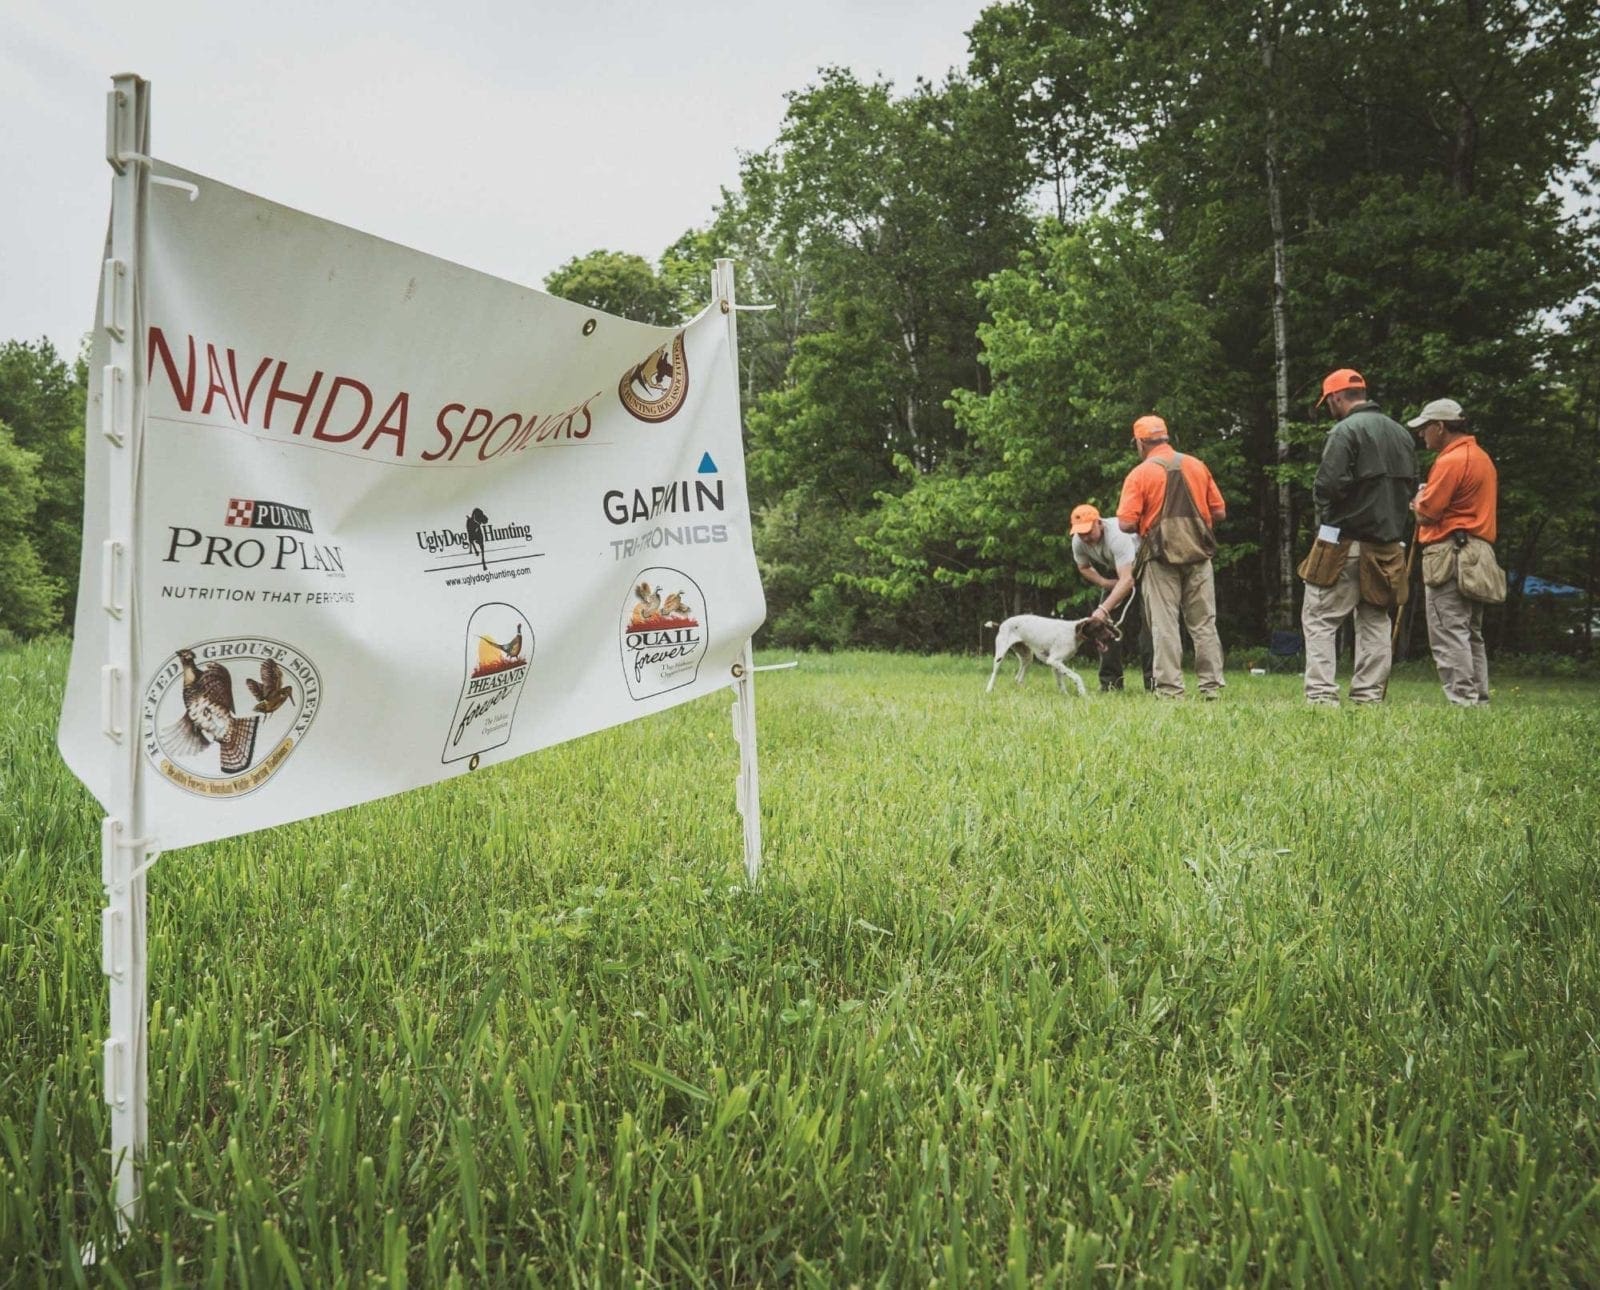 A group of NAVHDA members inspecting a hunting dog.